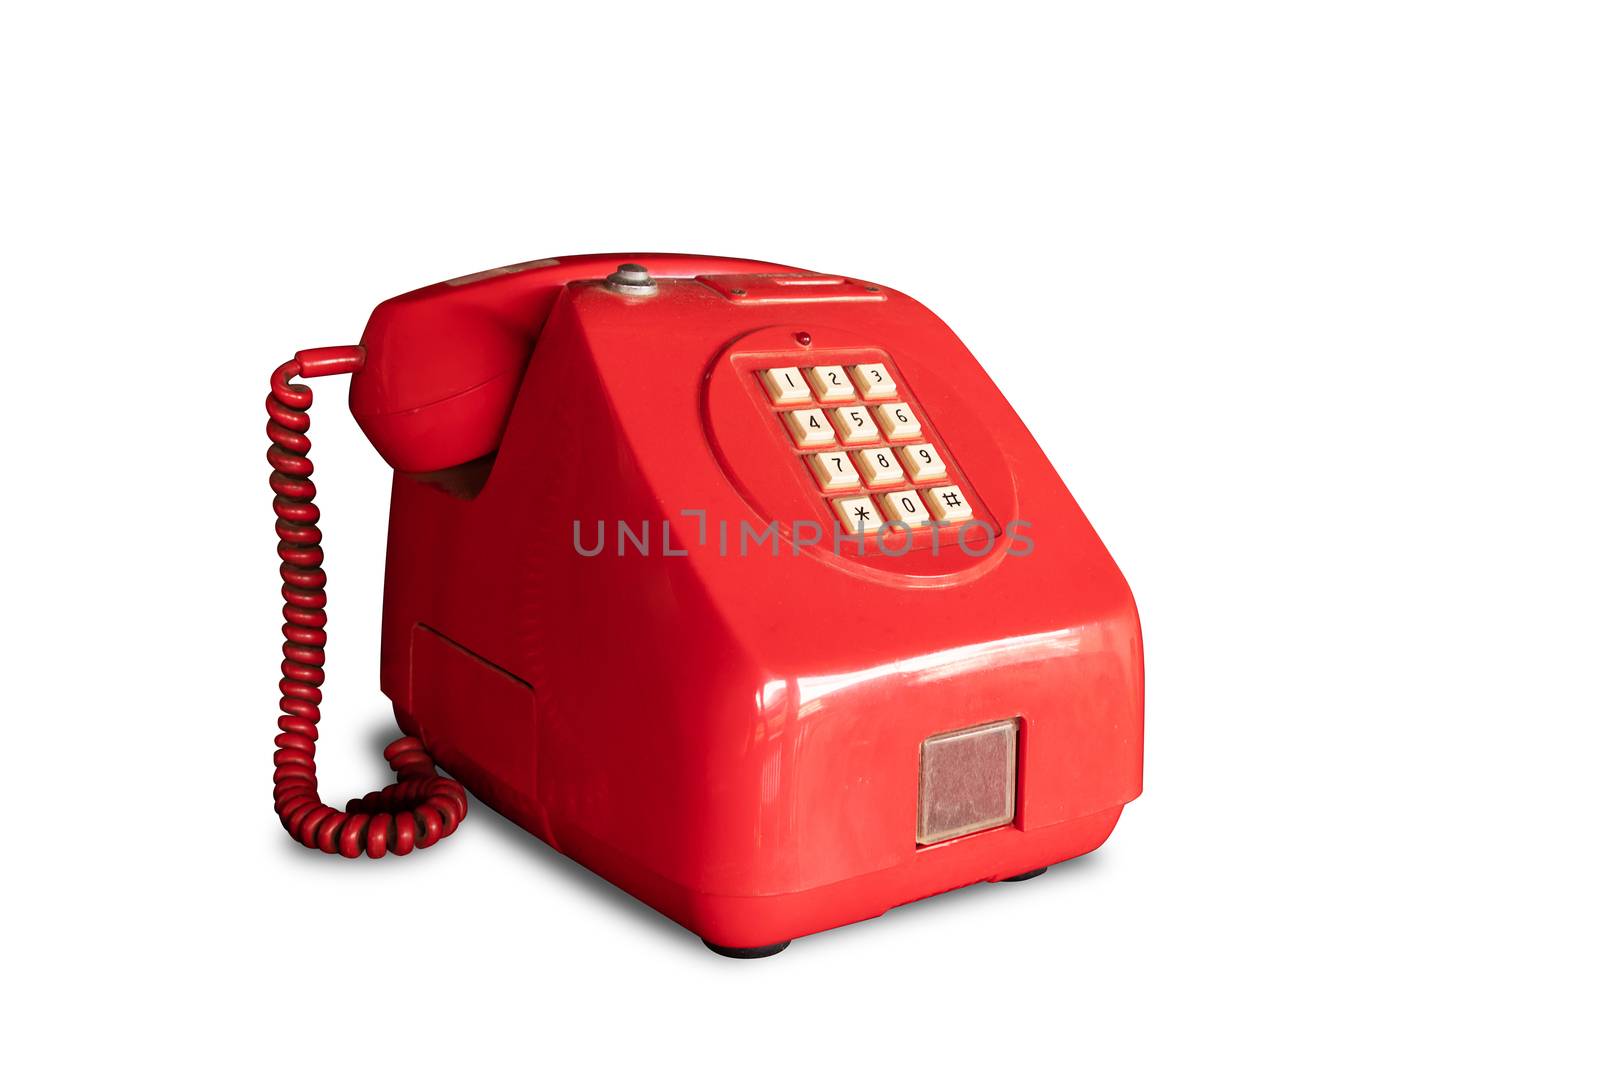 retro red pay phone operated by coins isolated on white background with clipping path by asiandelight